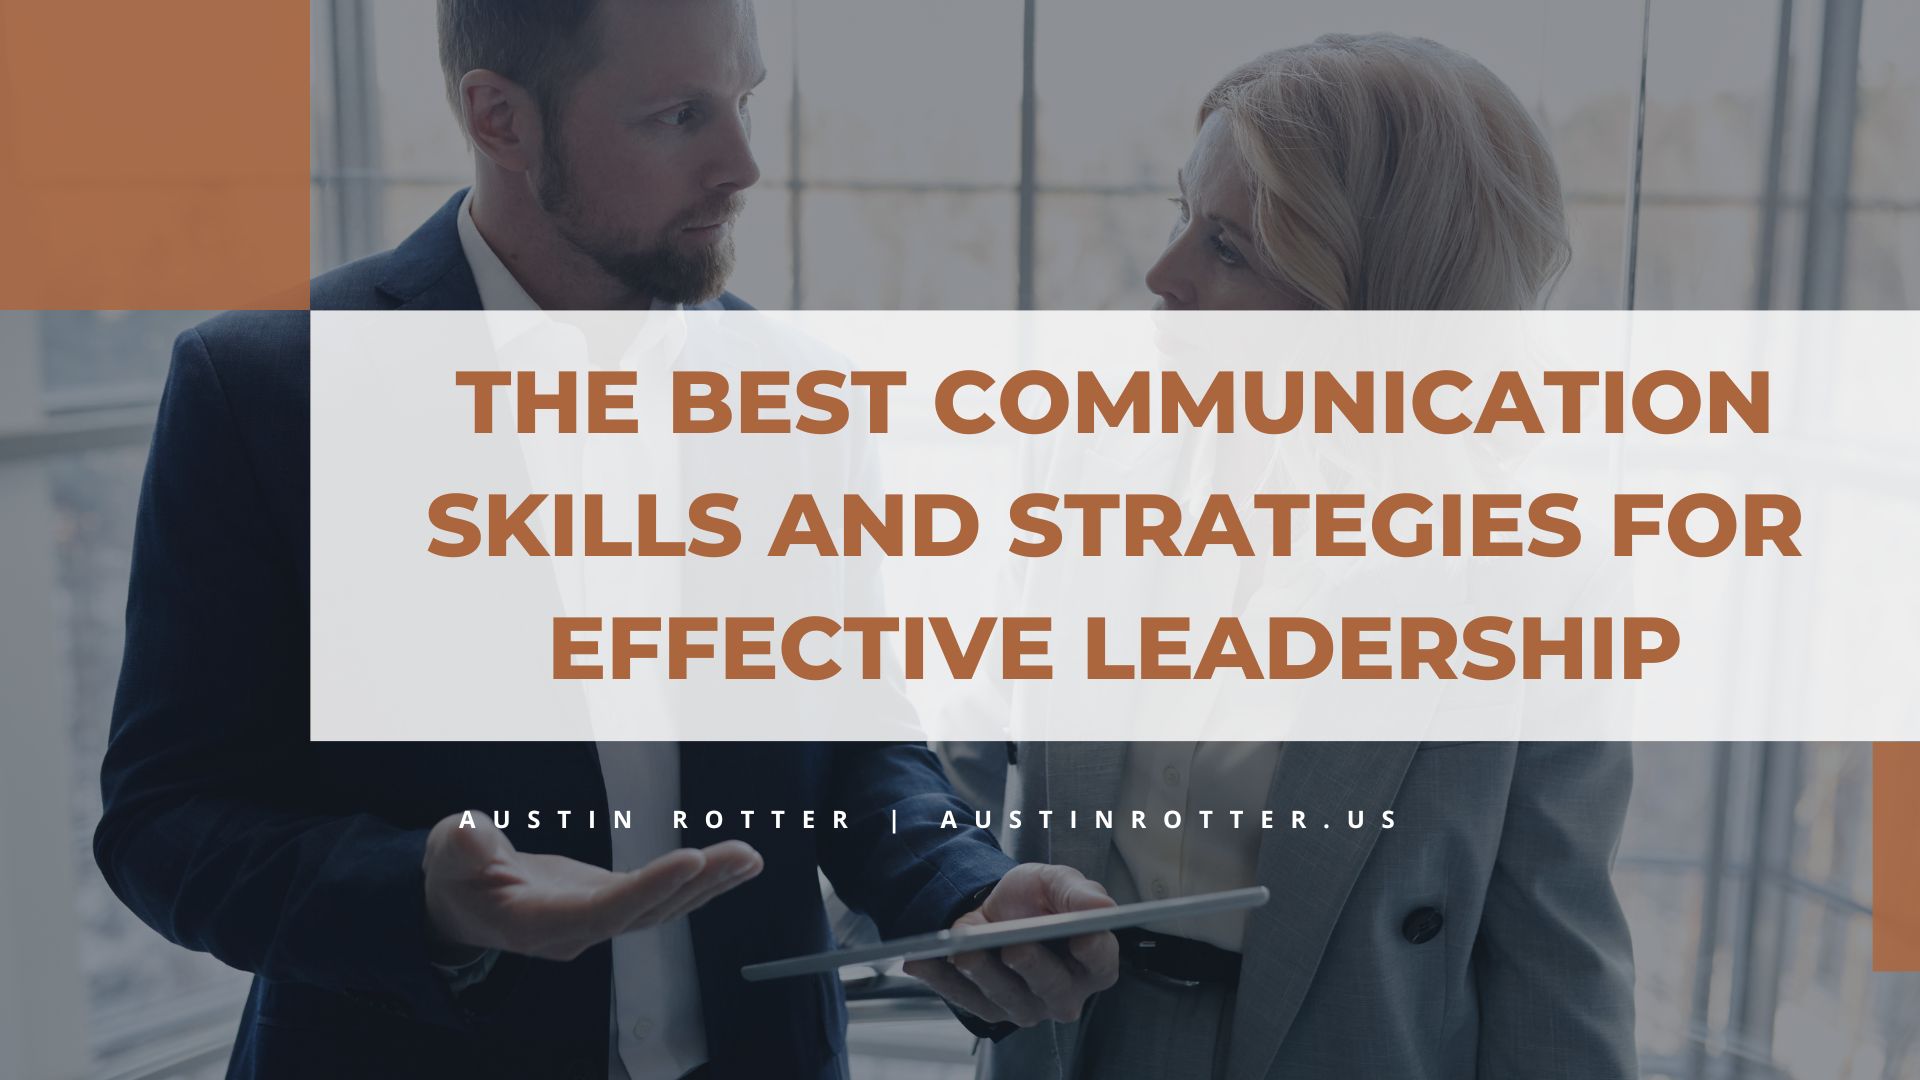 THE BEST COMMUNICATION
SKILLS AND STRATEGIES FOR

EFFECTIVE LEADERSHIP